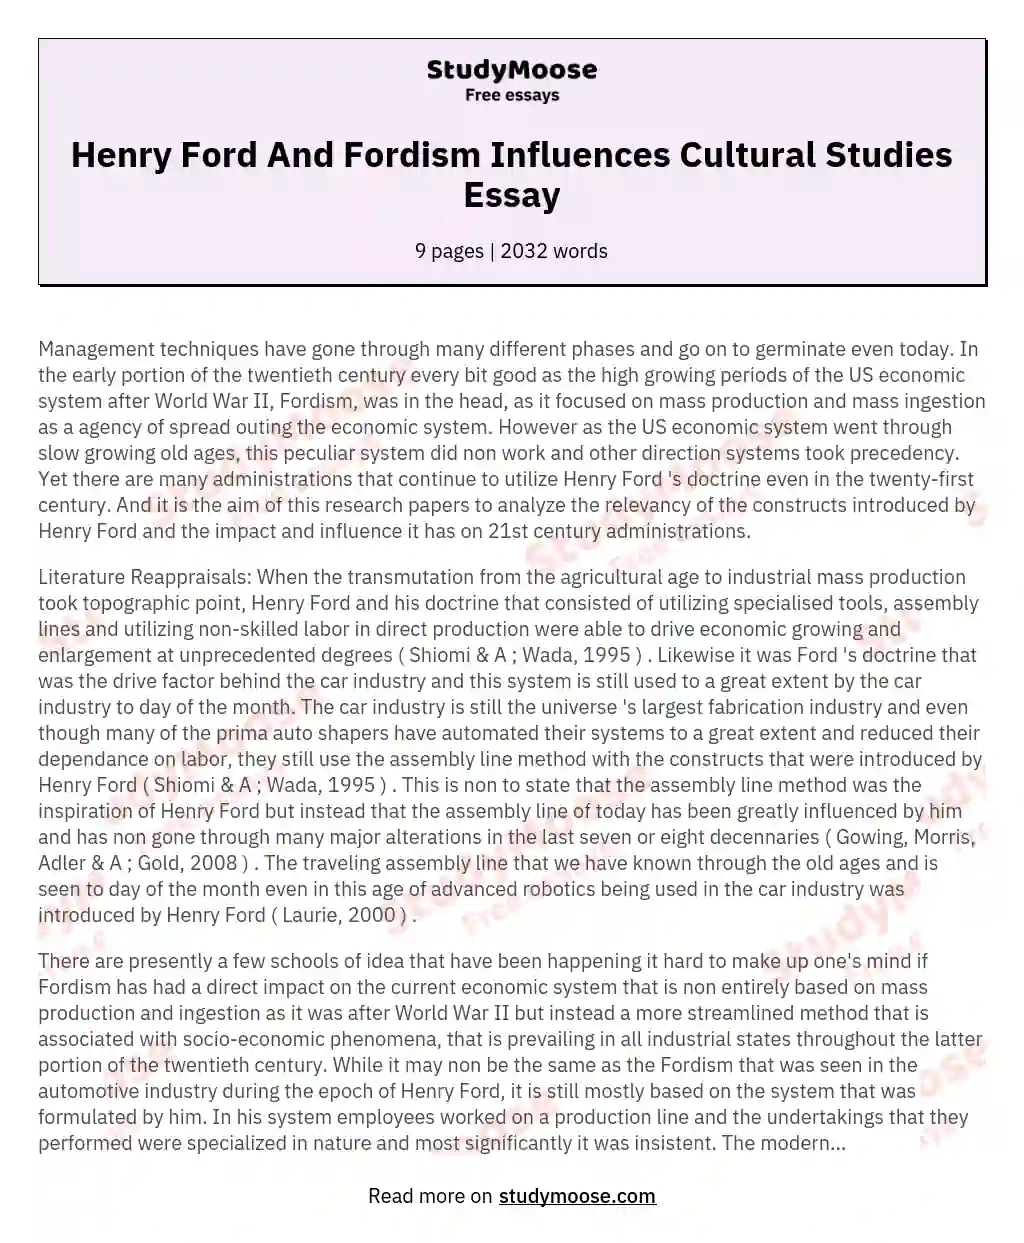 Henry Ford And Fordism Influences Cultural Studies Essay